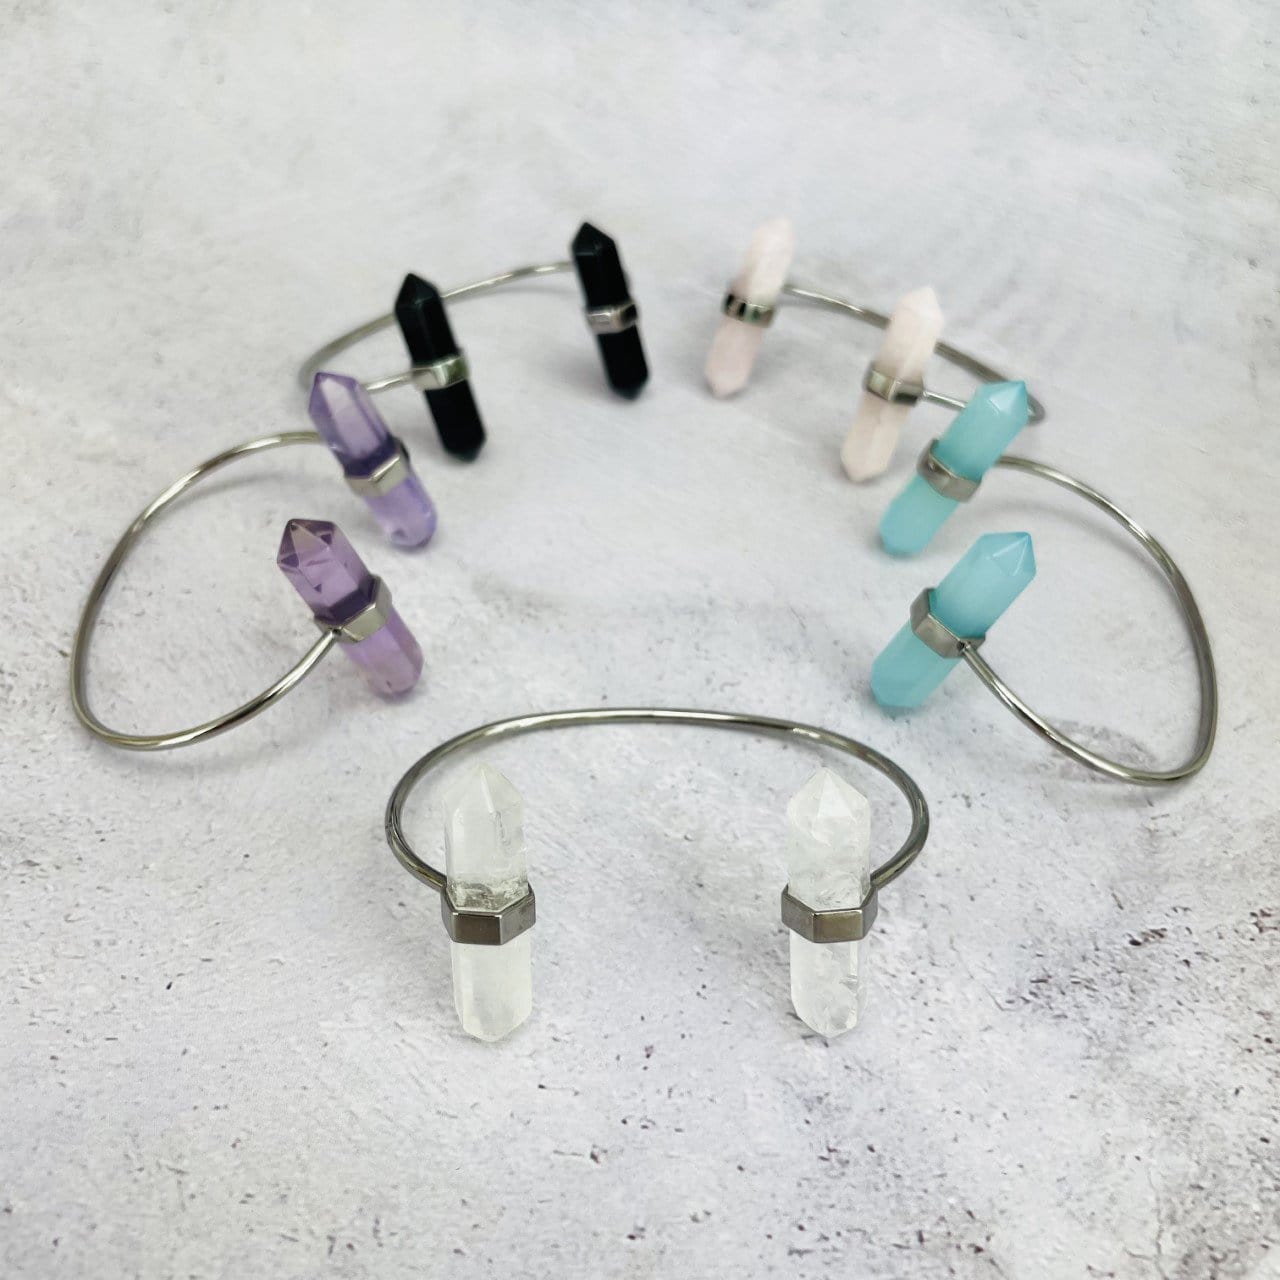 5 silver Crystal Point Cuffs in various crystals